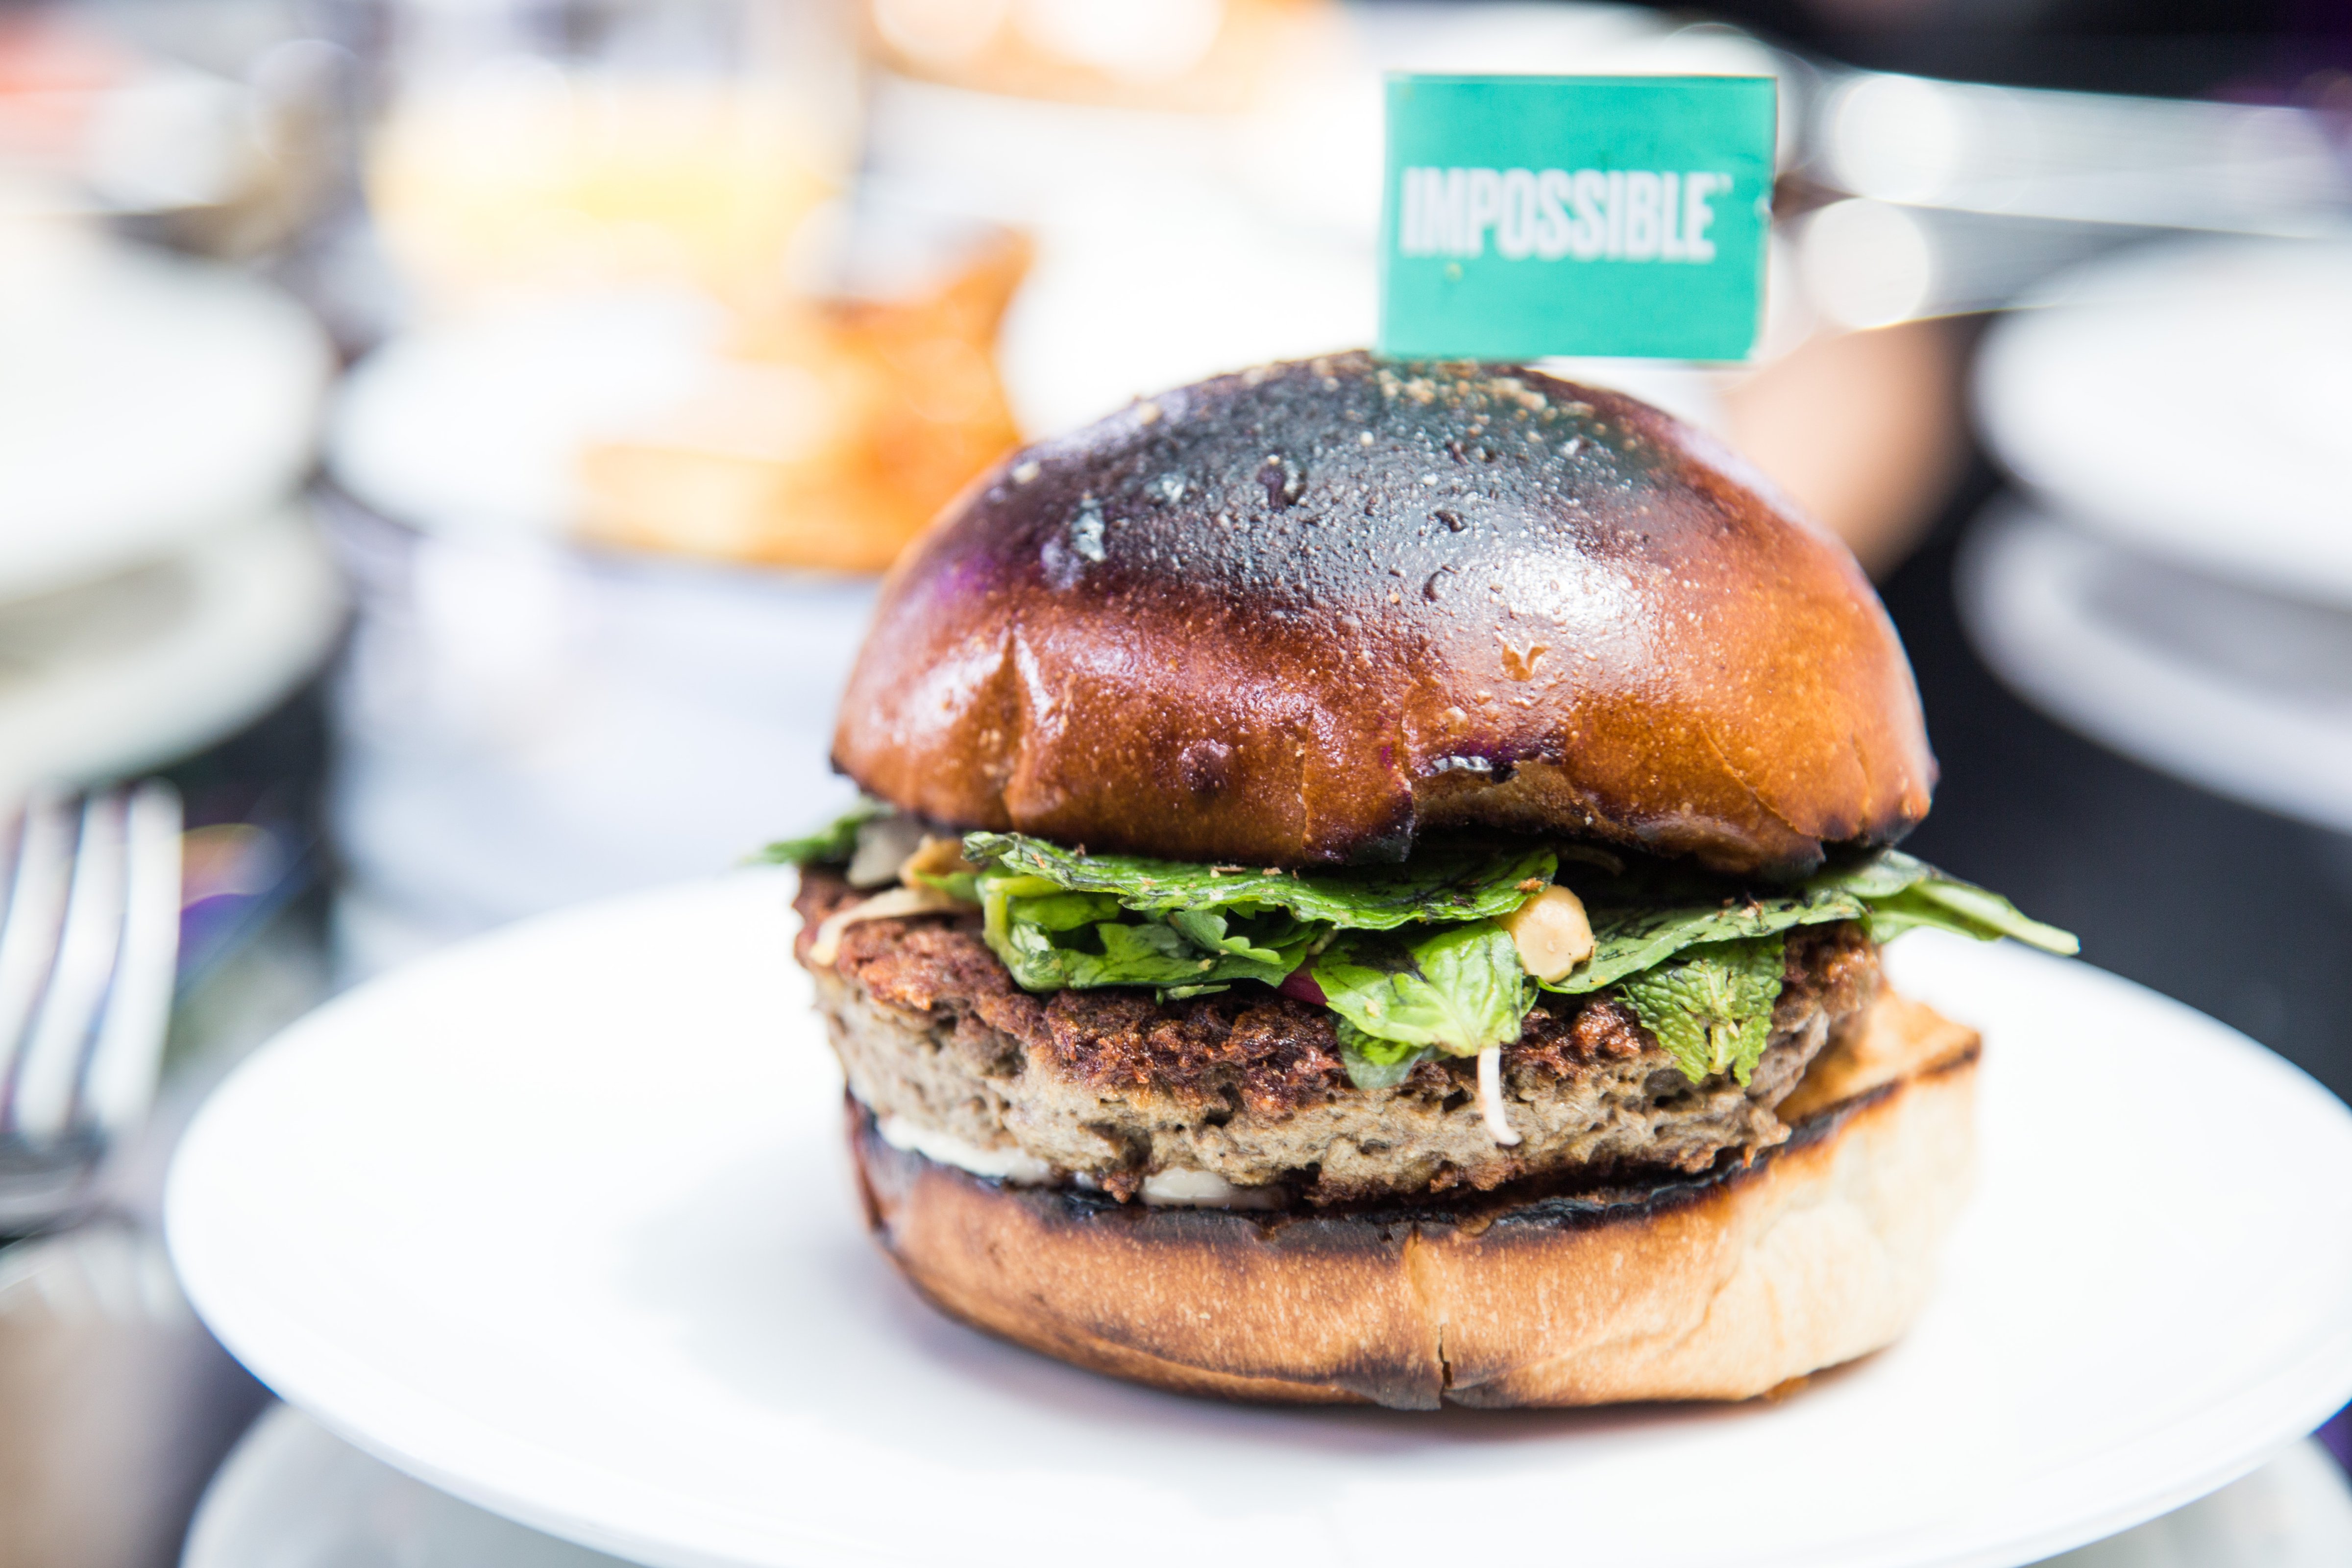 The Impossible Thai Burger by Uwe Opocensky, chef of Beef and Liberty (Aria Chen for TIME)